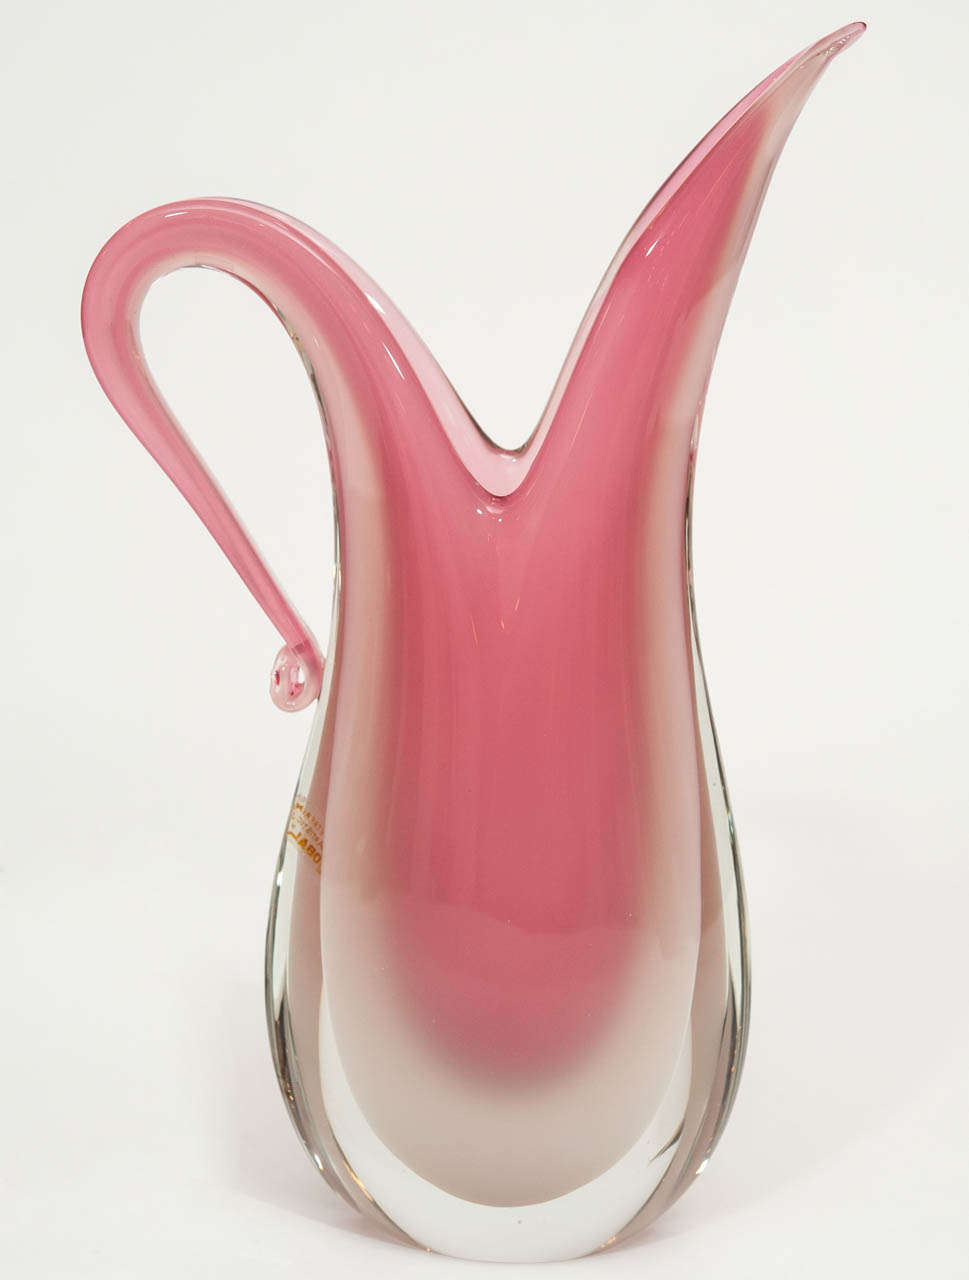 This elegant and graceful Murano vase is manufactured
by Oball under the direction of Luigi Onesto and his sons.
His sommerso technique is after Flavio Poli for Seguso.
Label Vetreria Artistica.